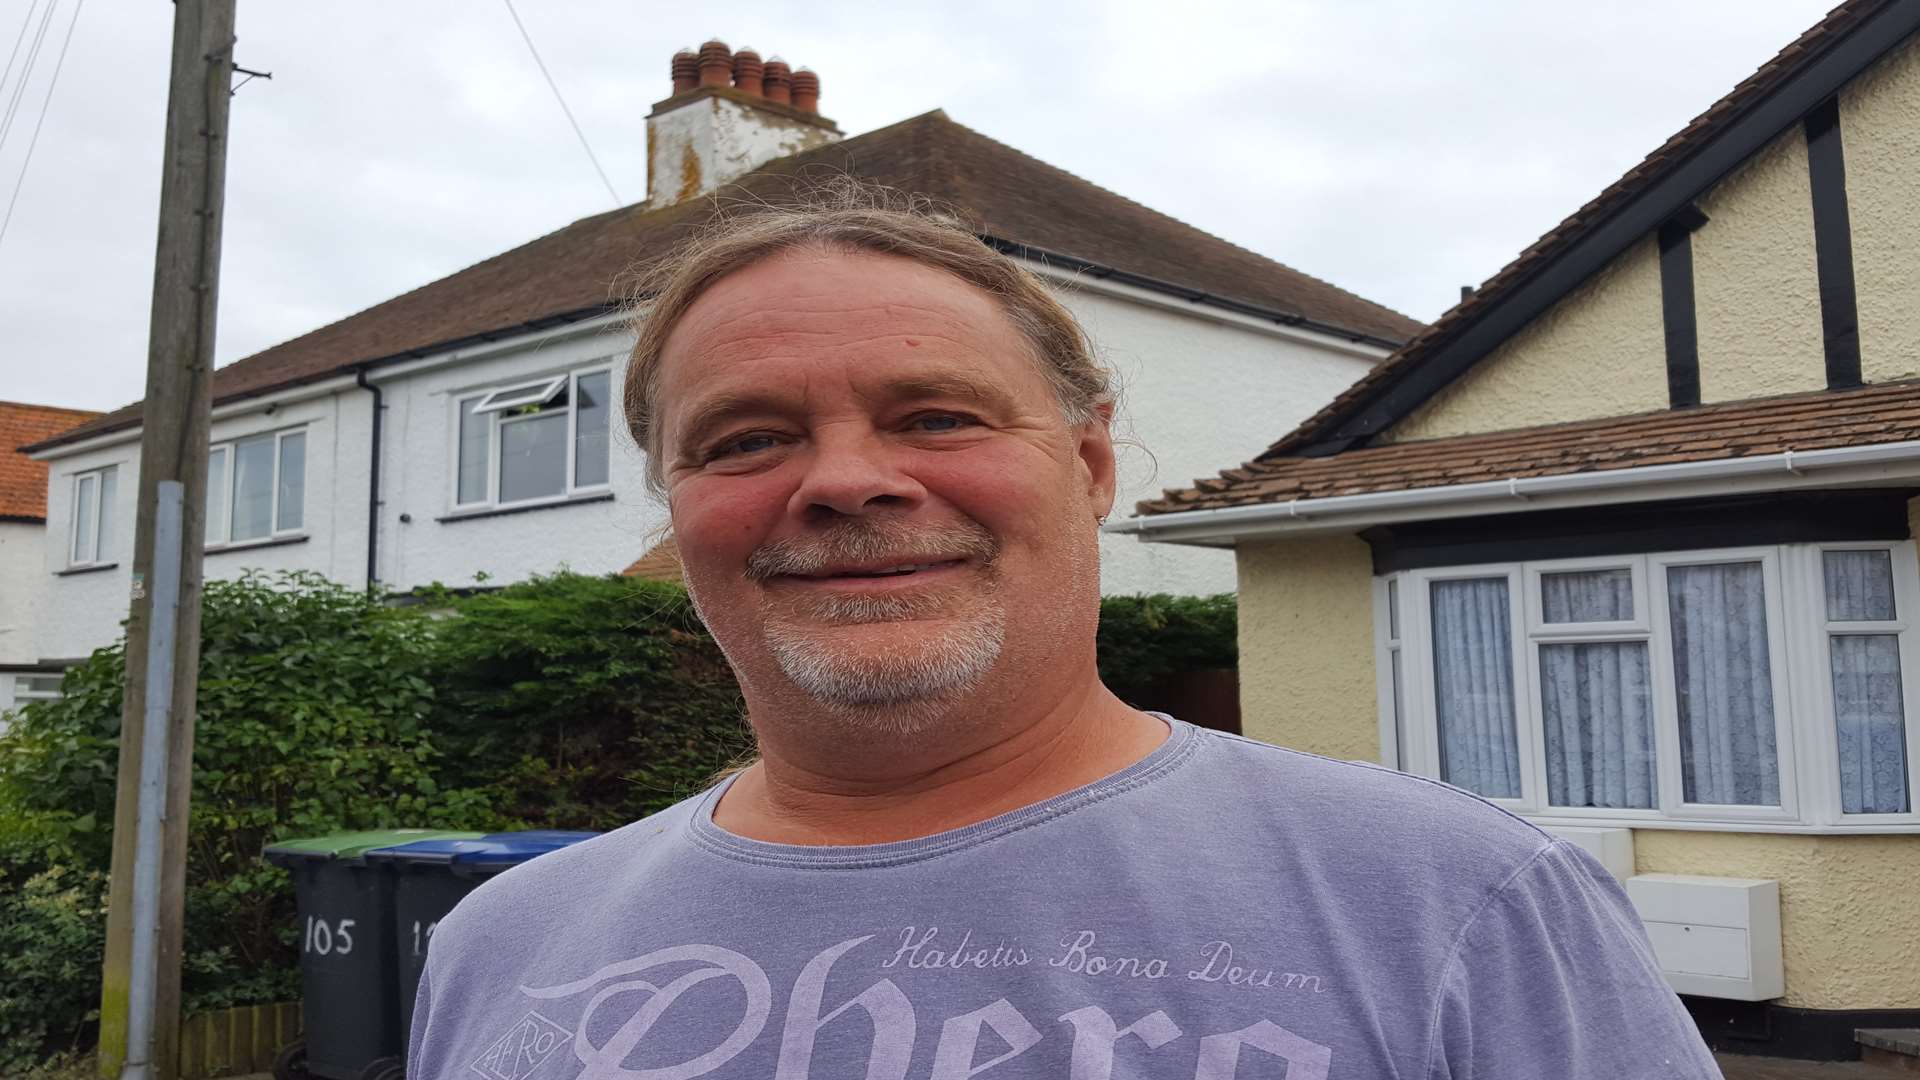 Roofer Tony King who fixed the pensioner's chimney